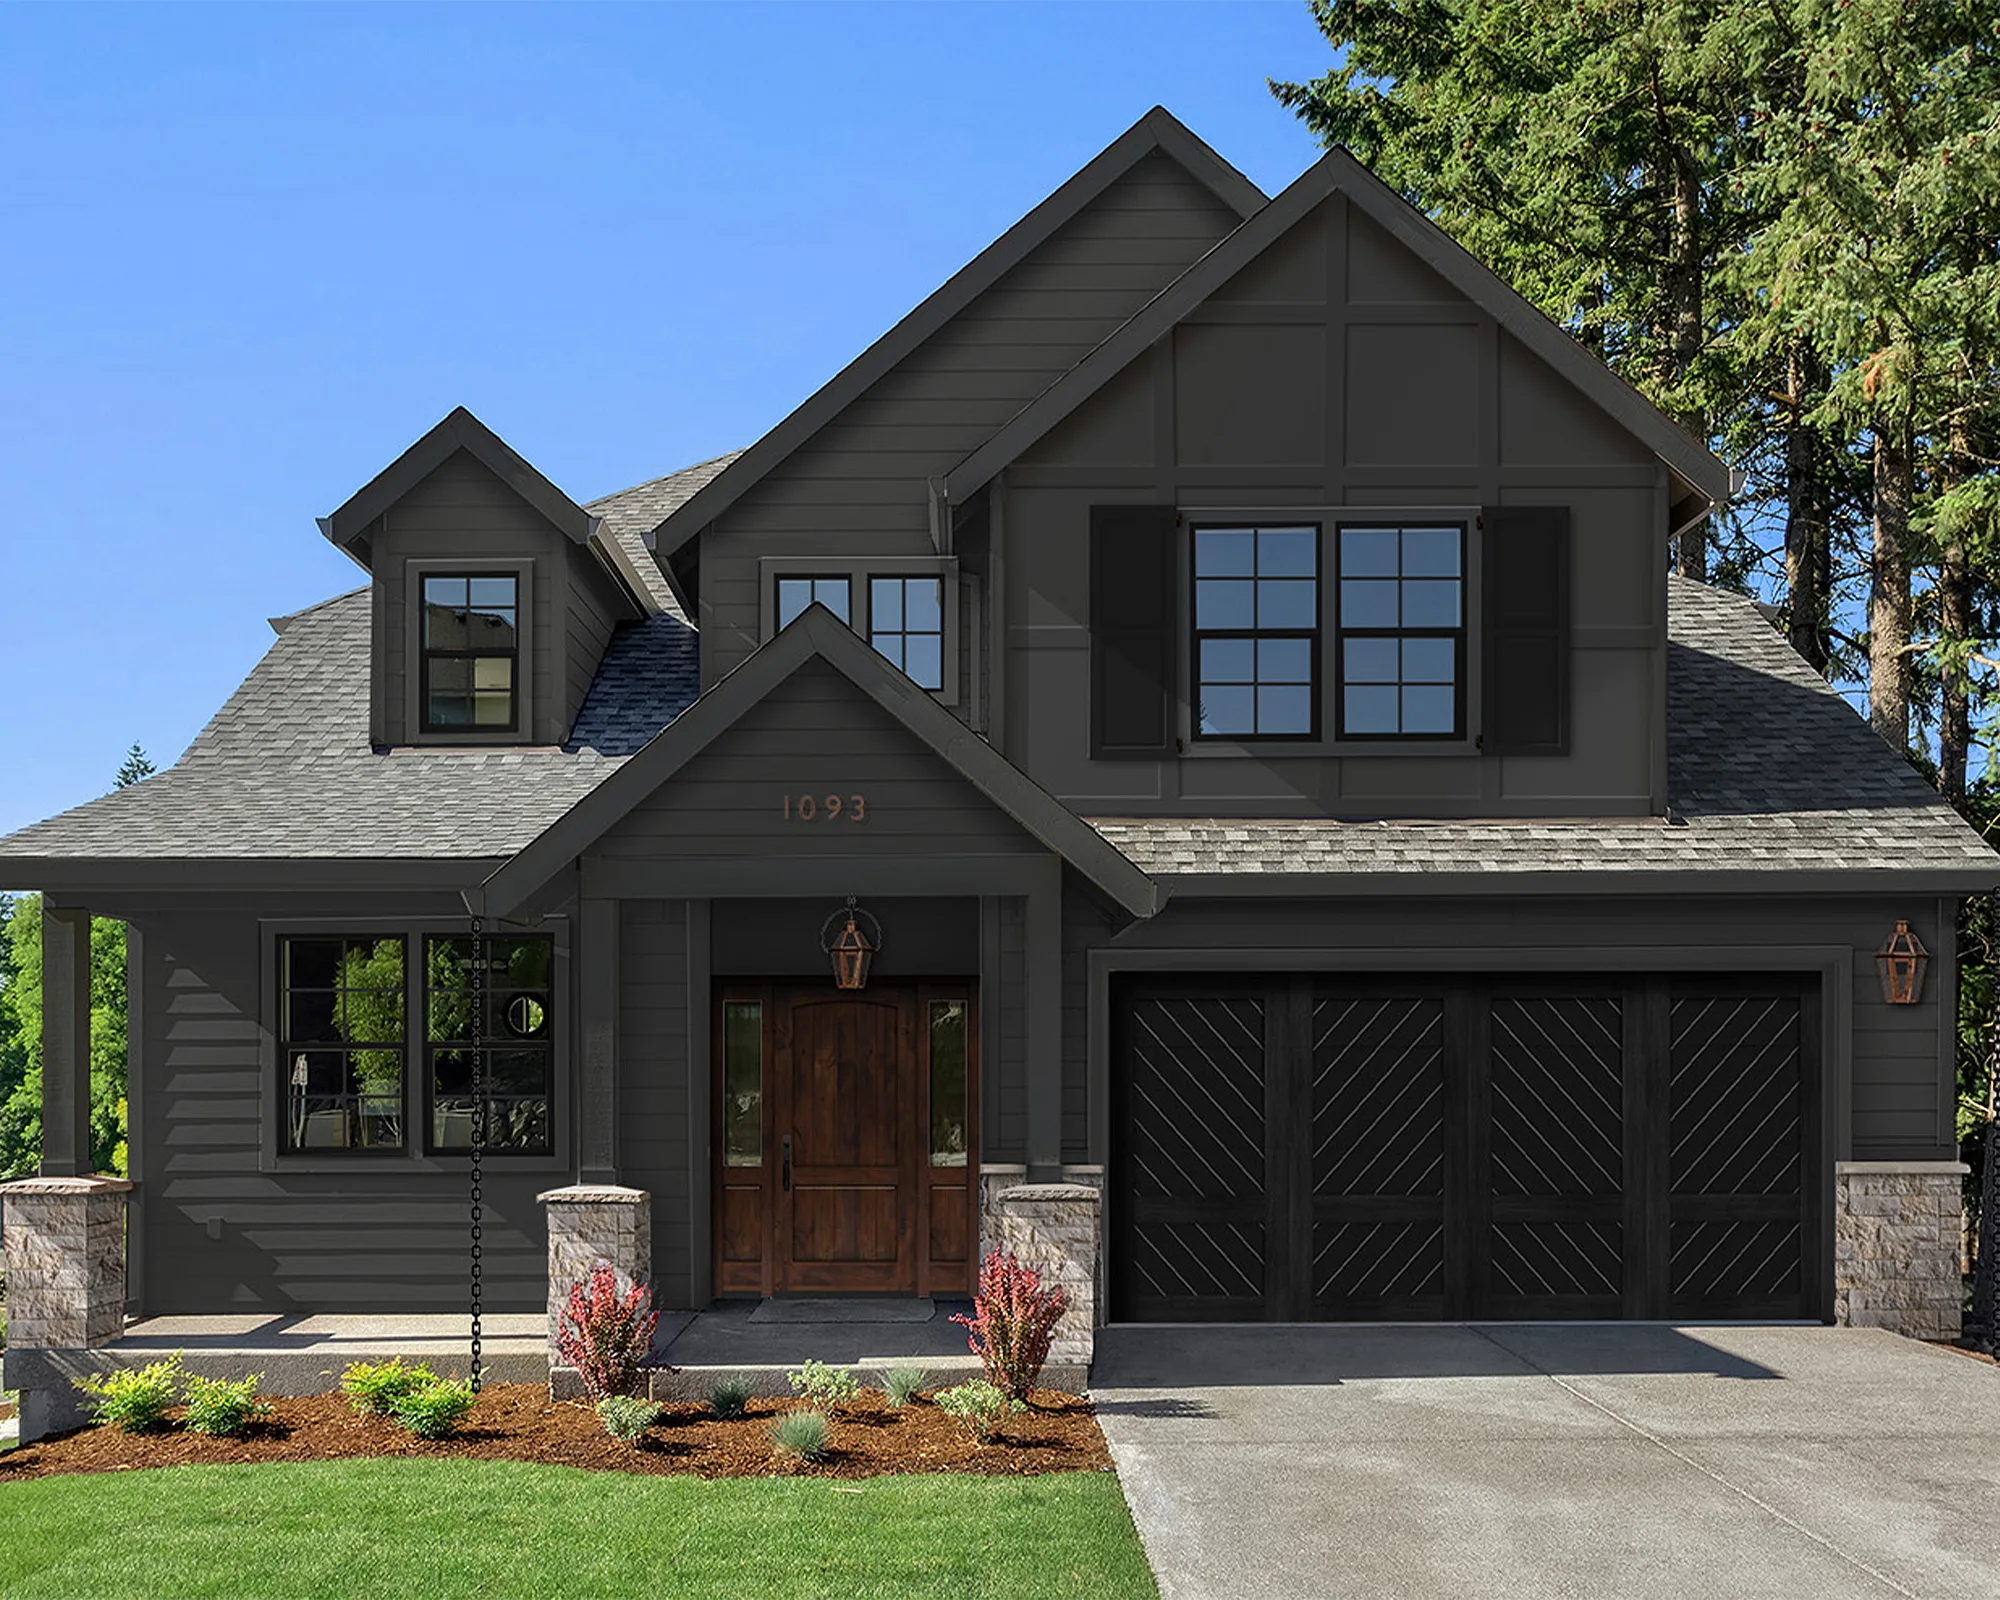 Dark Modern Cottage Exterior Design with charcoal paint, natural stone and copper accents